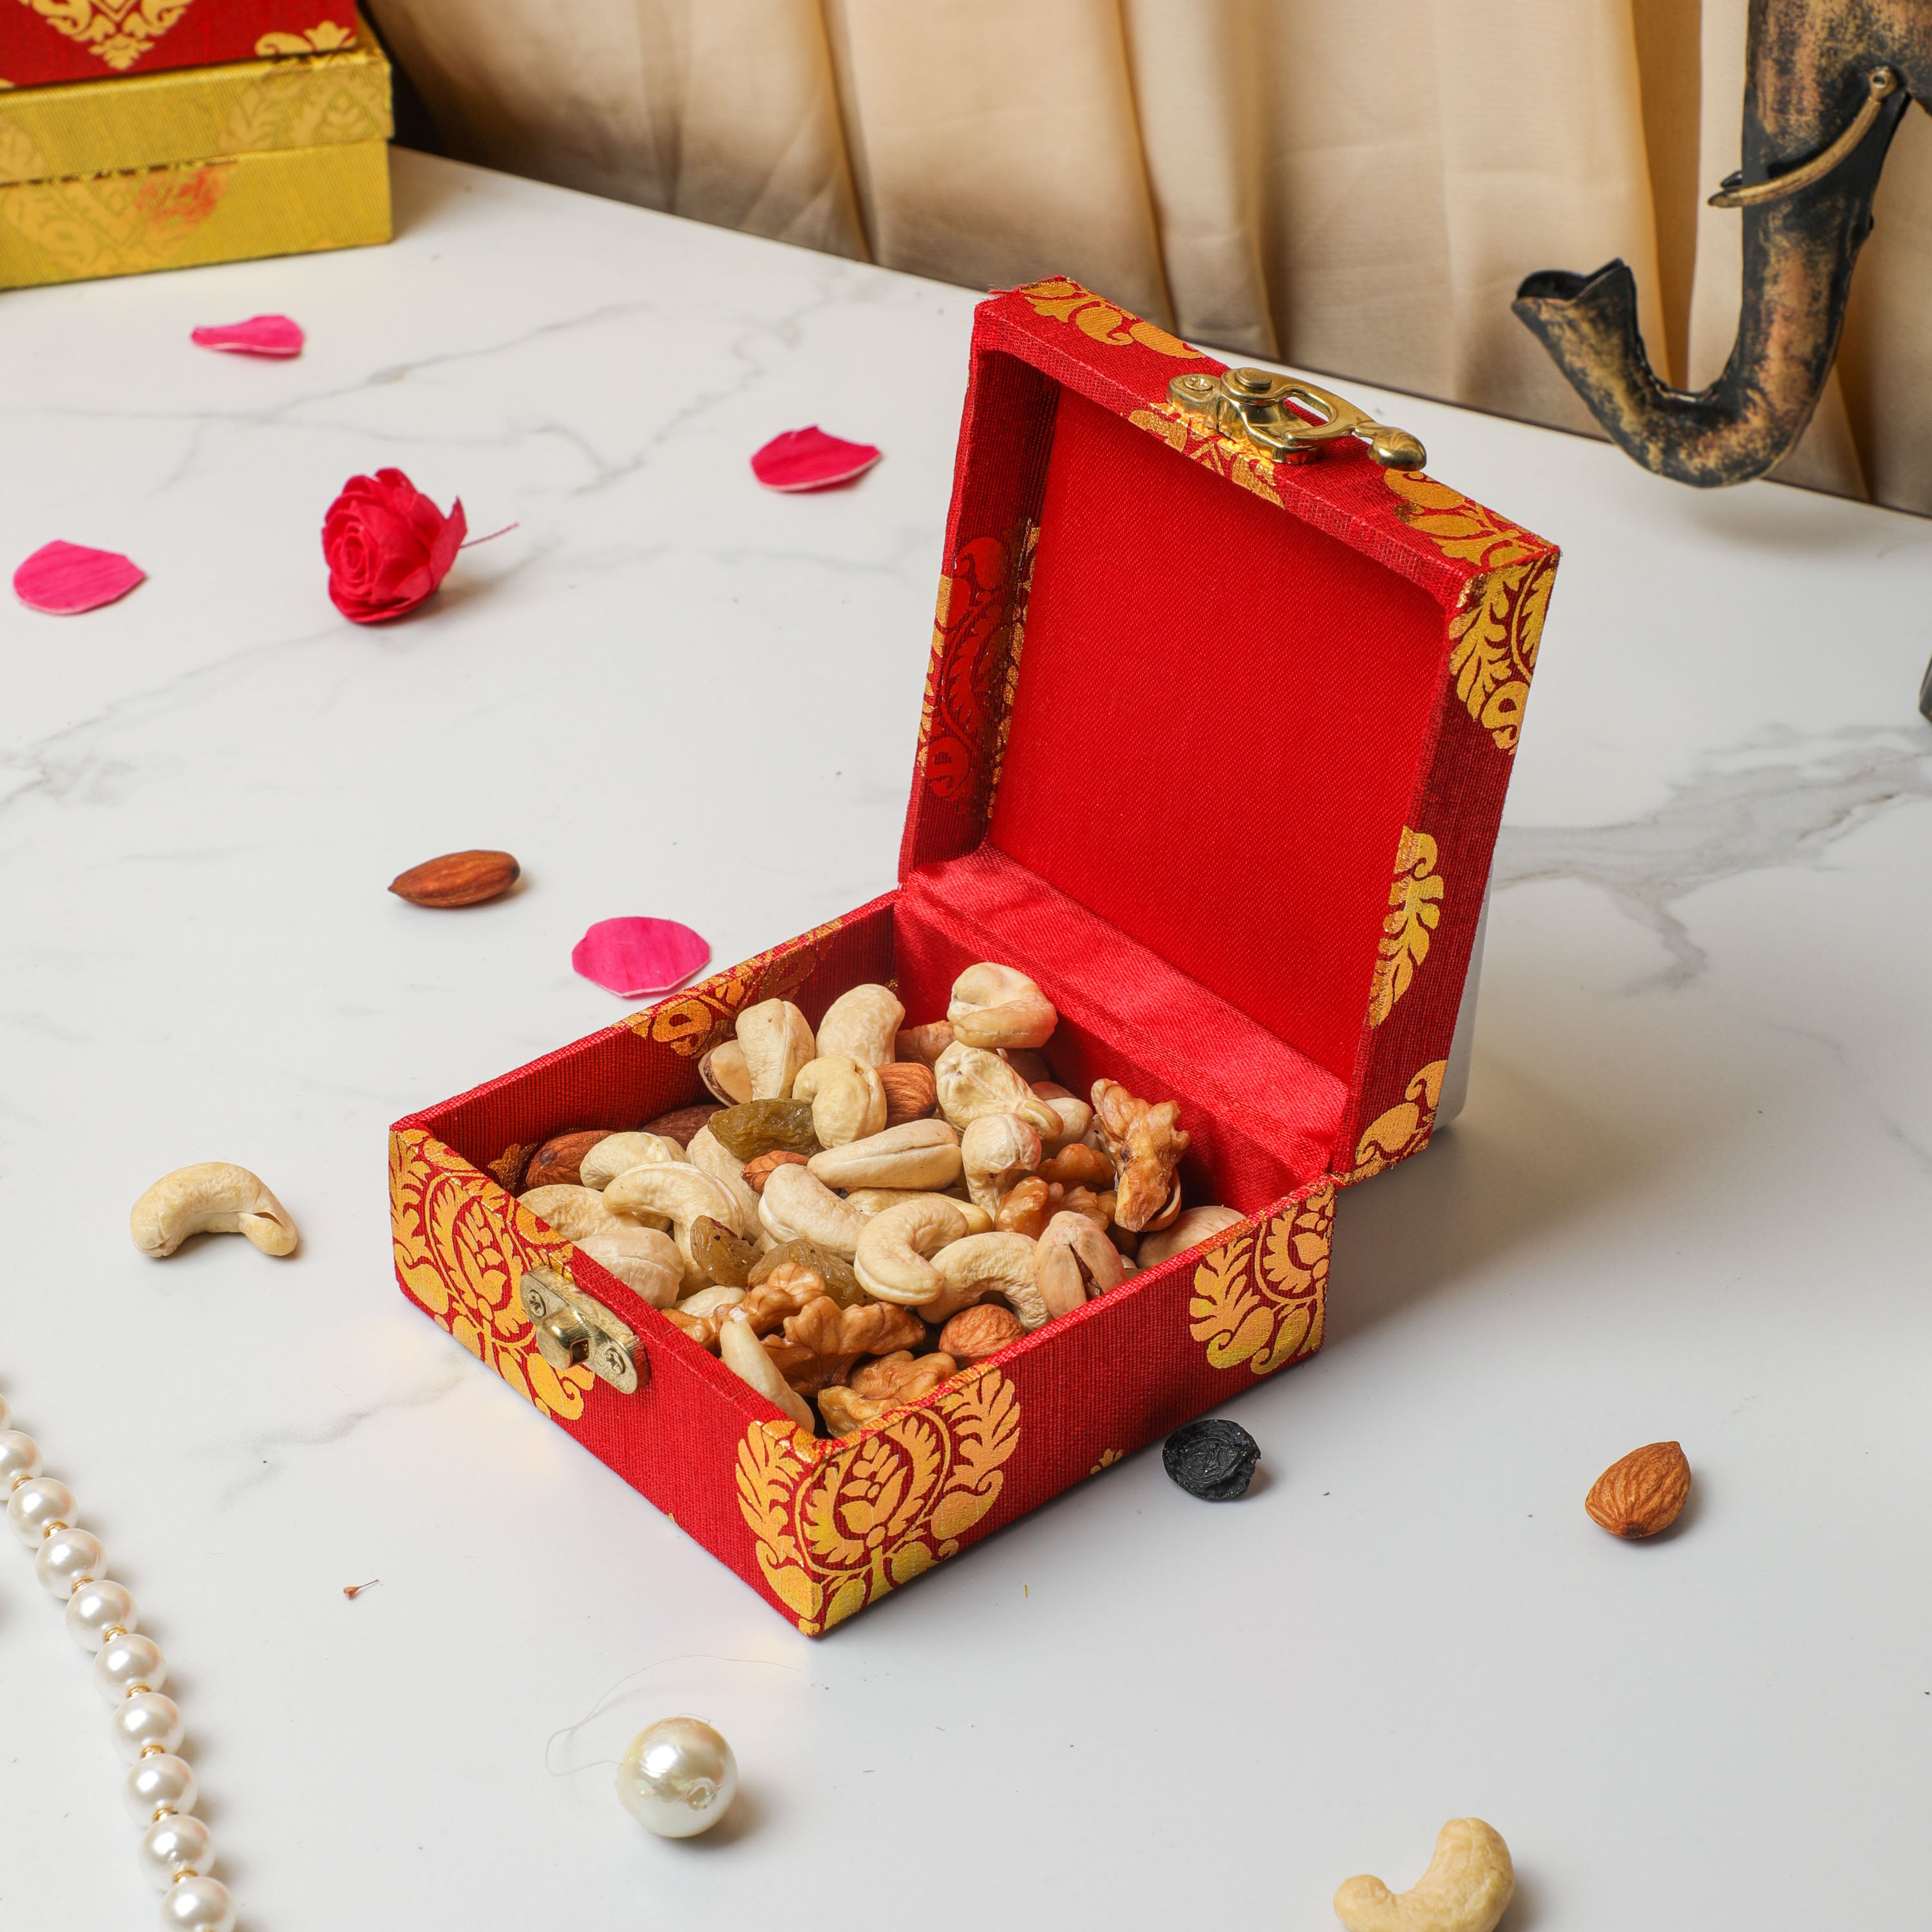 Handicrafted Decorative Box nut boxes case for nuts for gifting